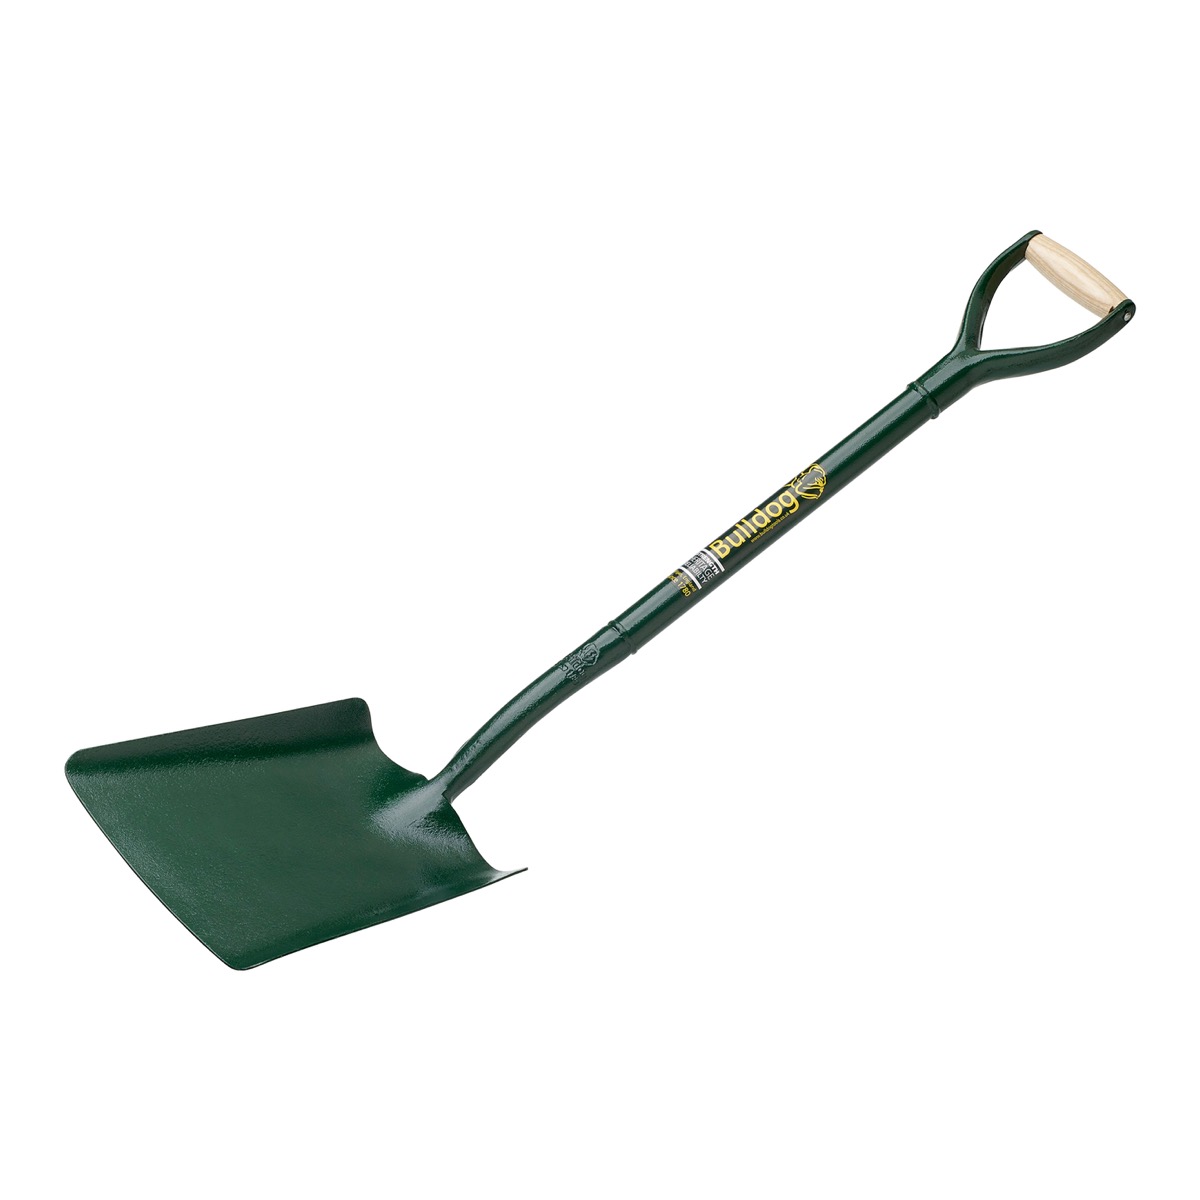 Solid forged from one piece of steel to give maximum strength, this shovel is designed to be the work horse of the contractors range. The square shaped blade enables the shovel to take a maximum load every time. These construction site ready spades are av